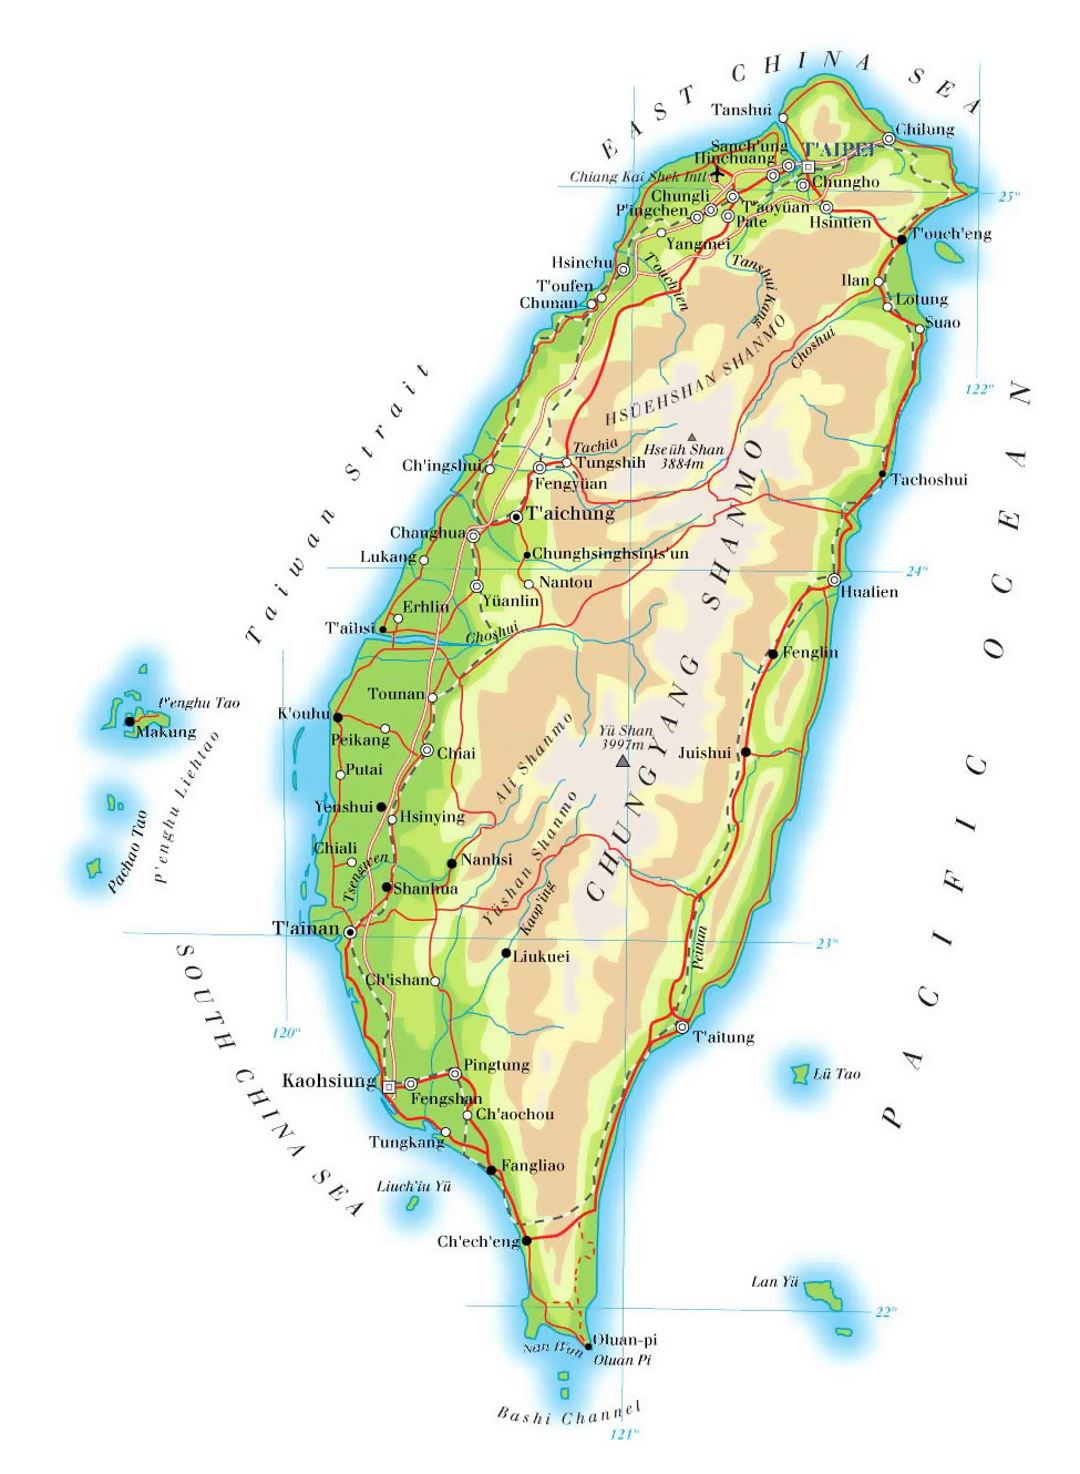 Detailed elevation map of Taiwan with roads, railroads, cities and airports